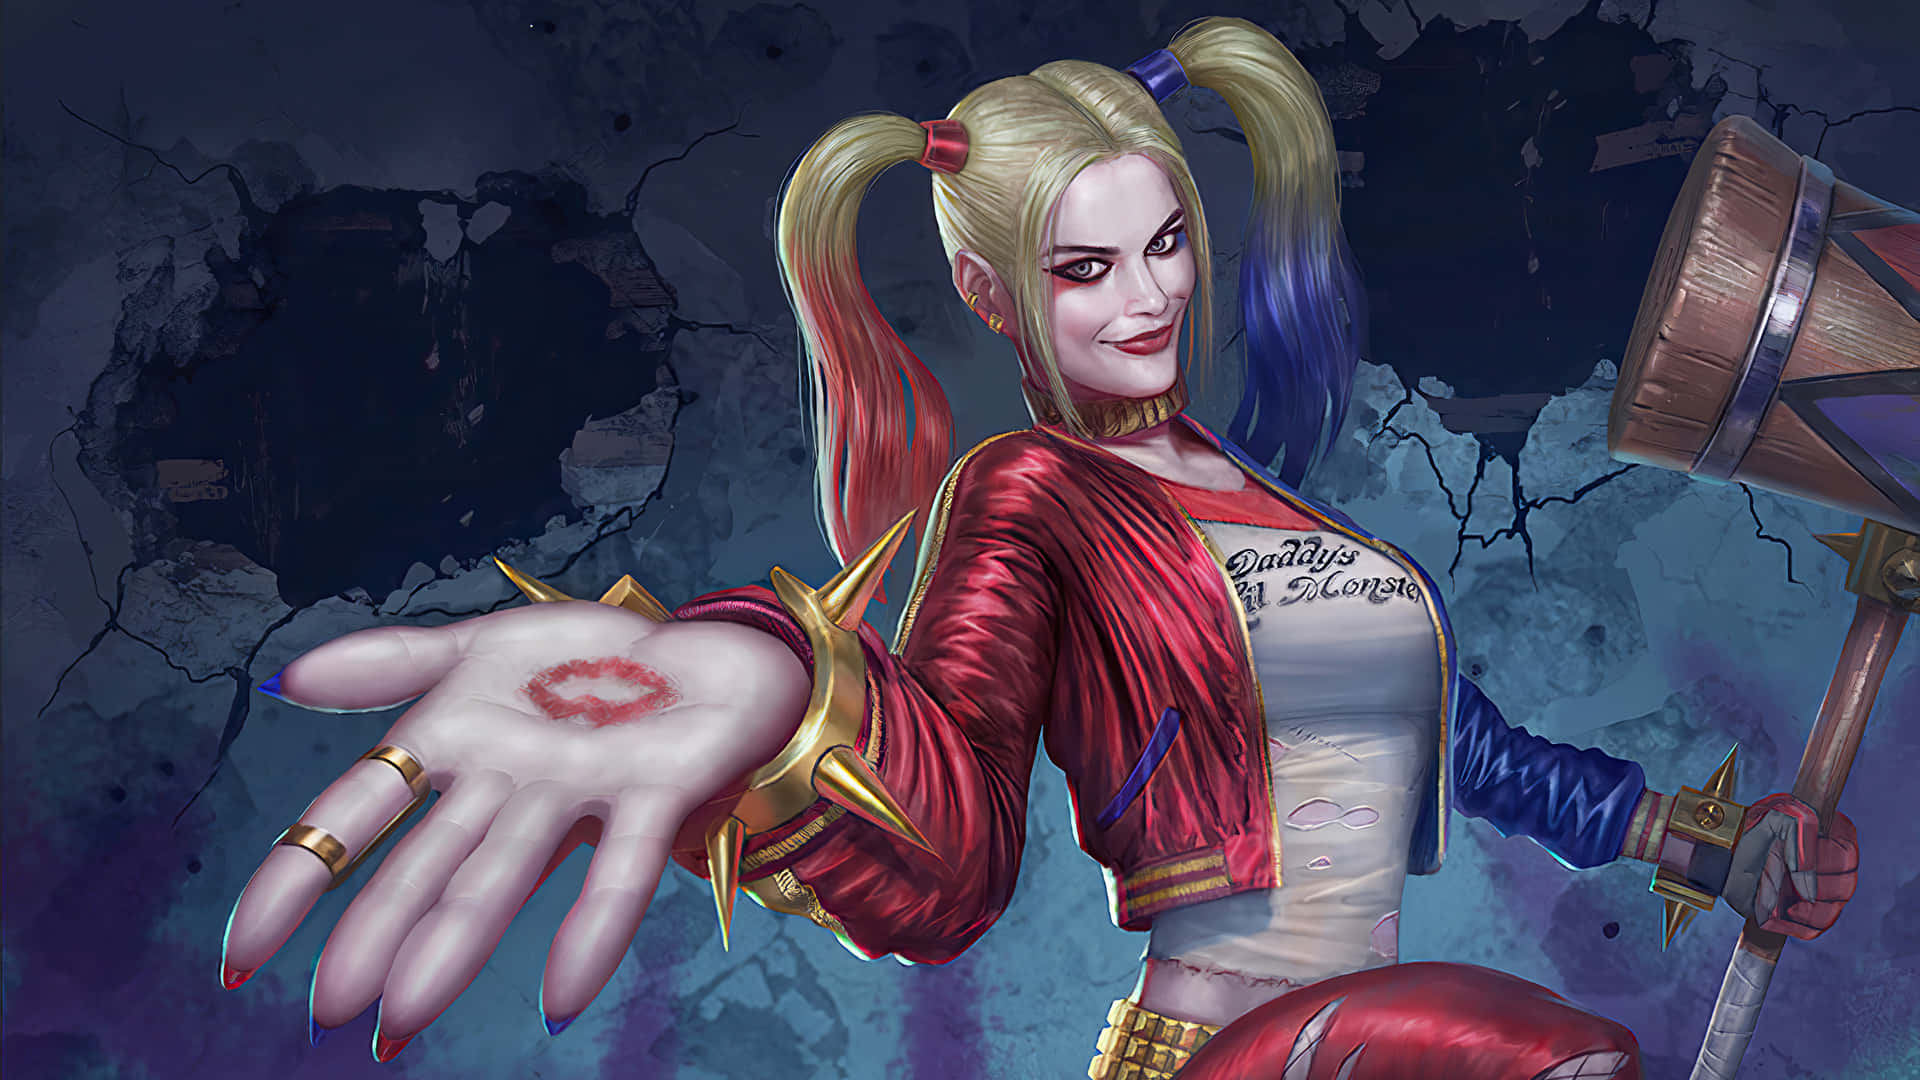 Mischievous Harley Quinn with her iconic hammer Wallpaper